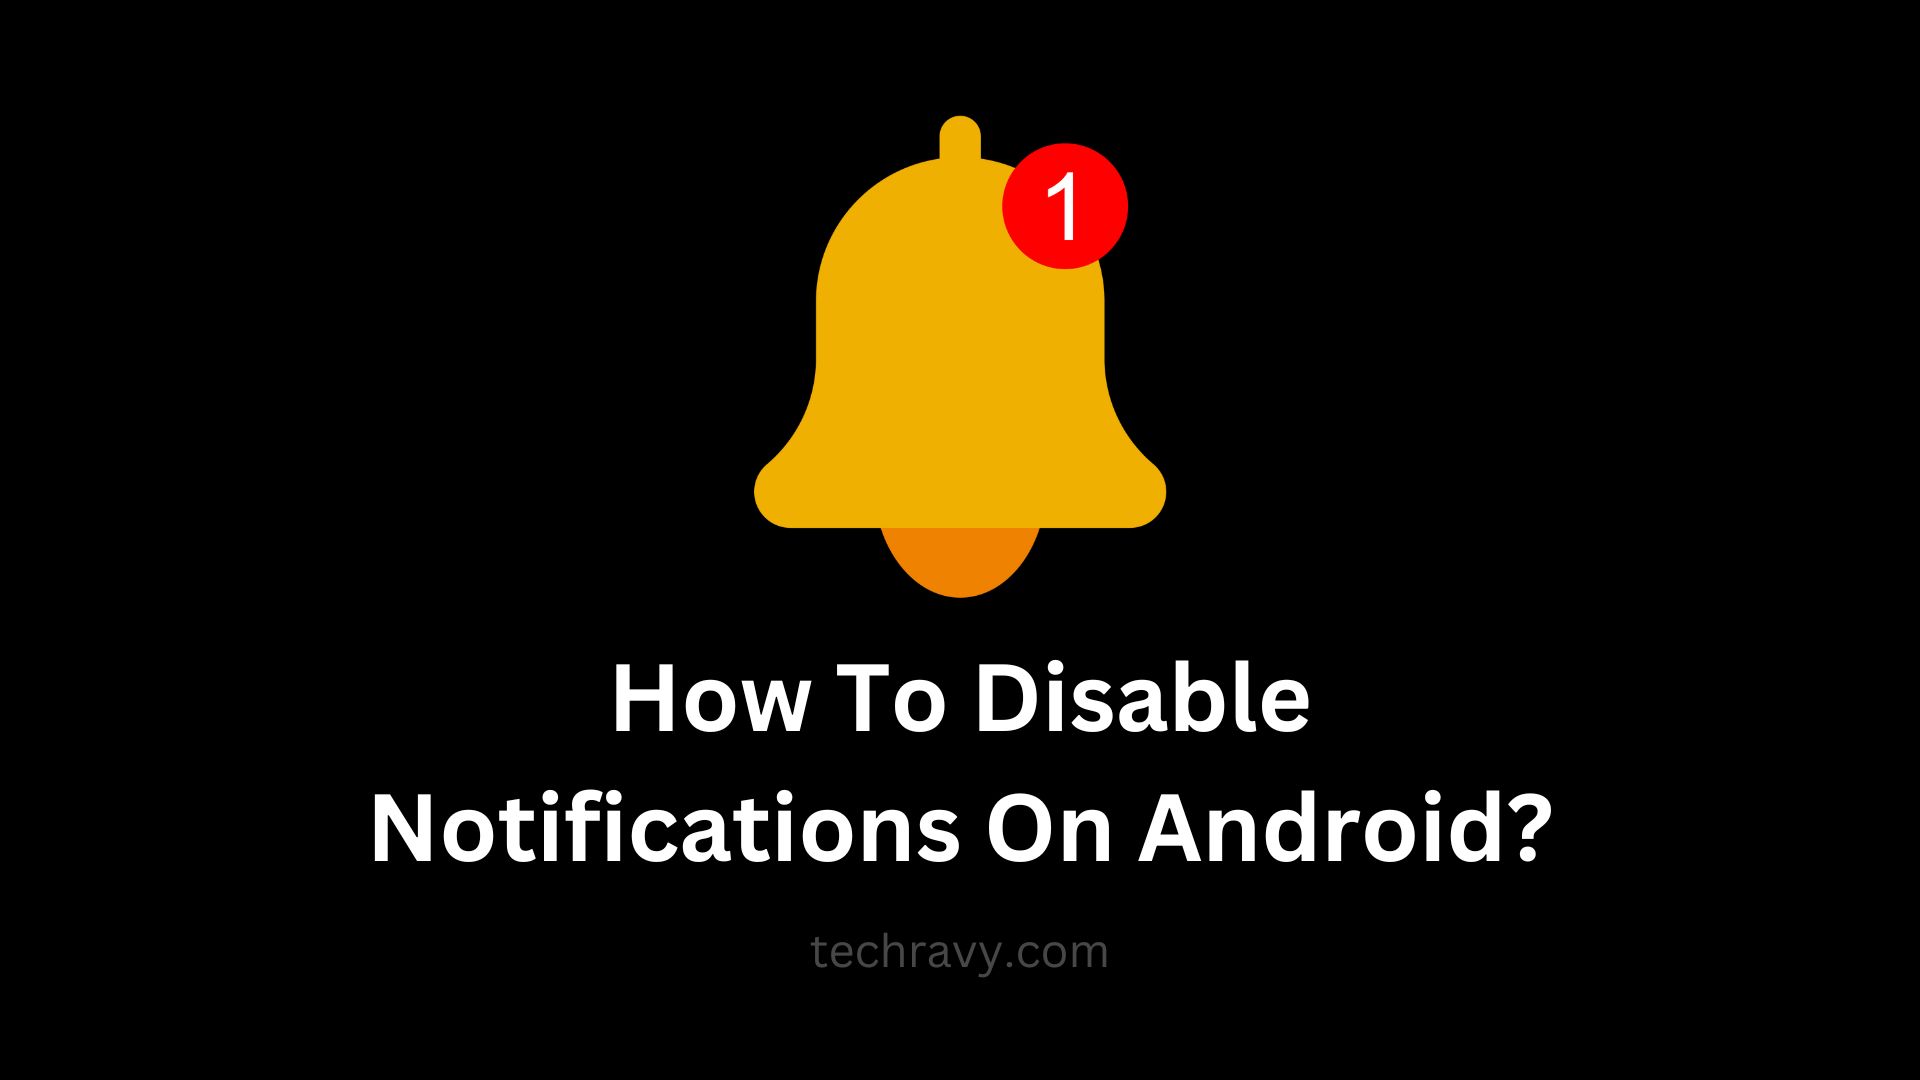 How To Disable Notifications On Android